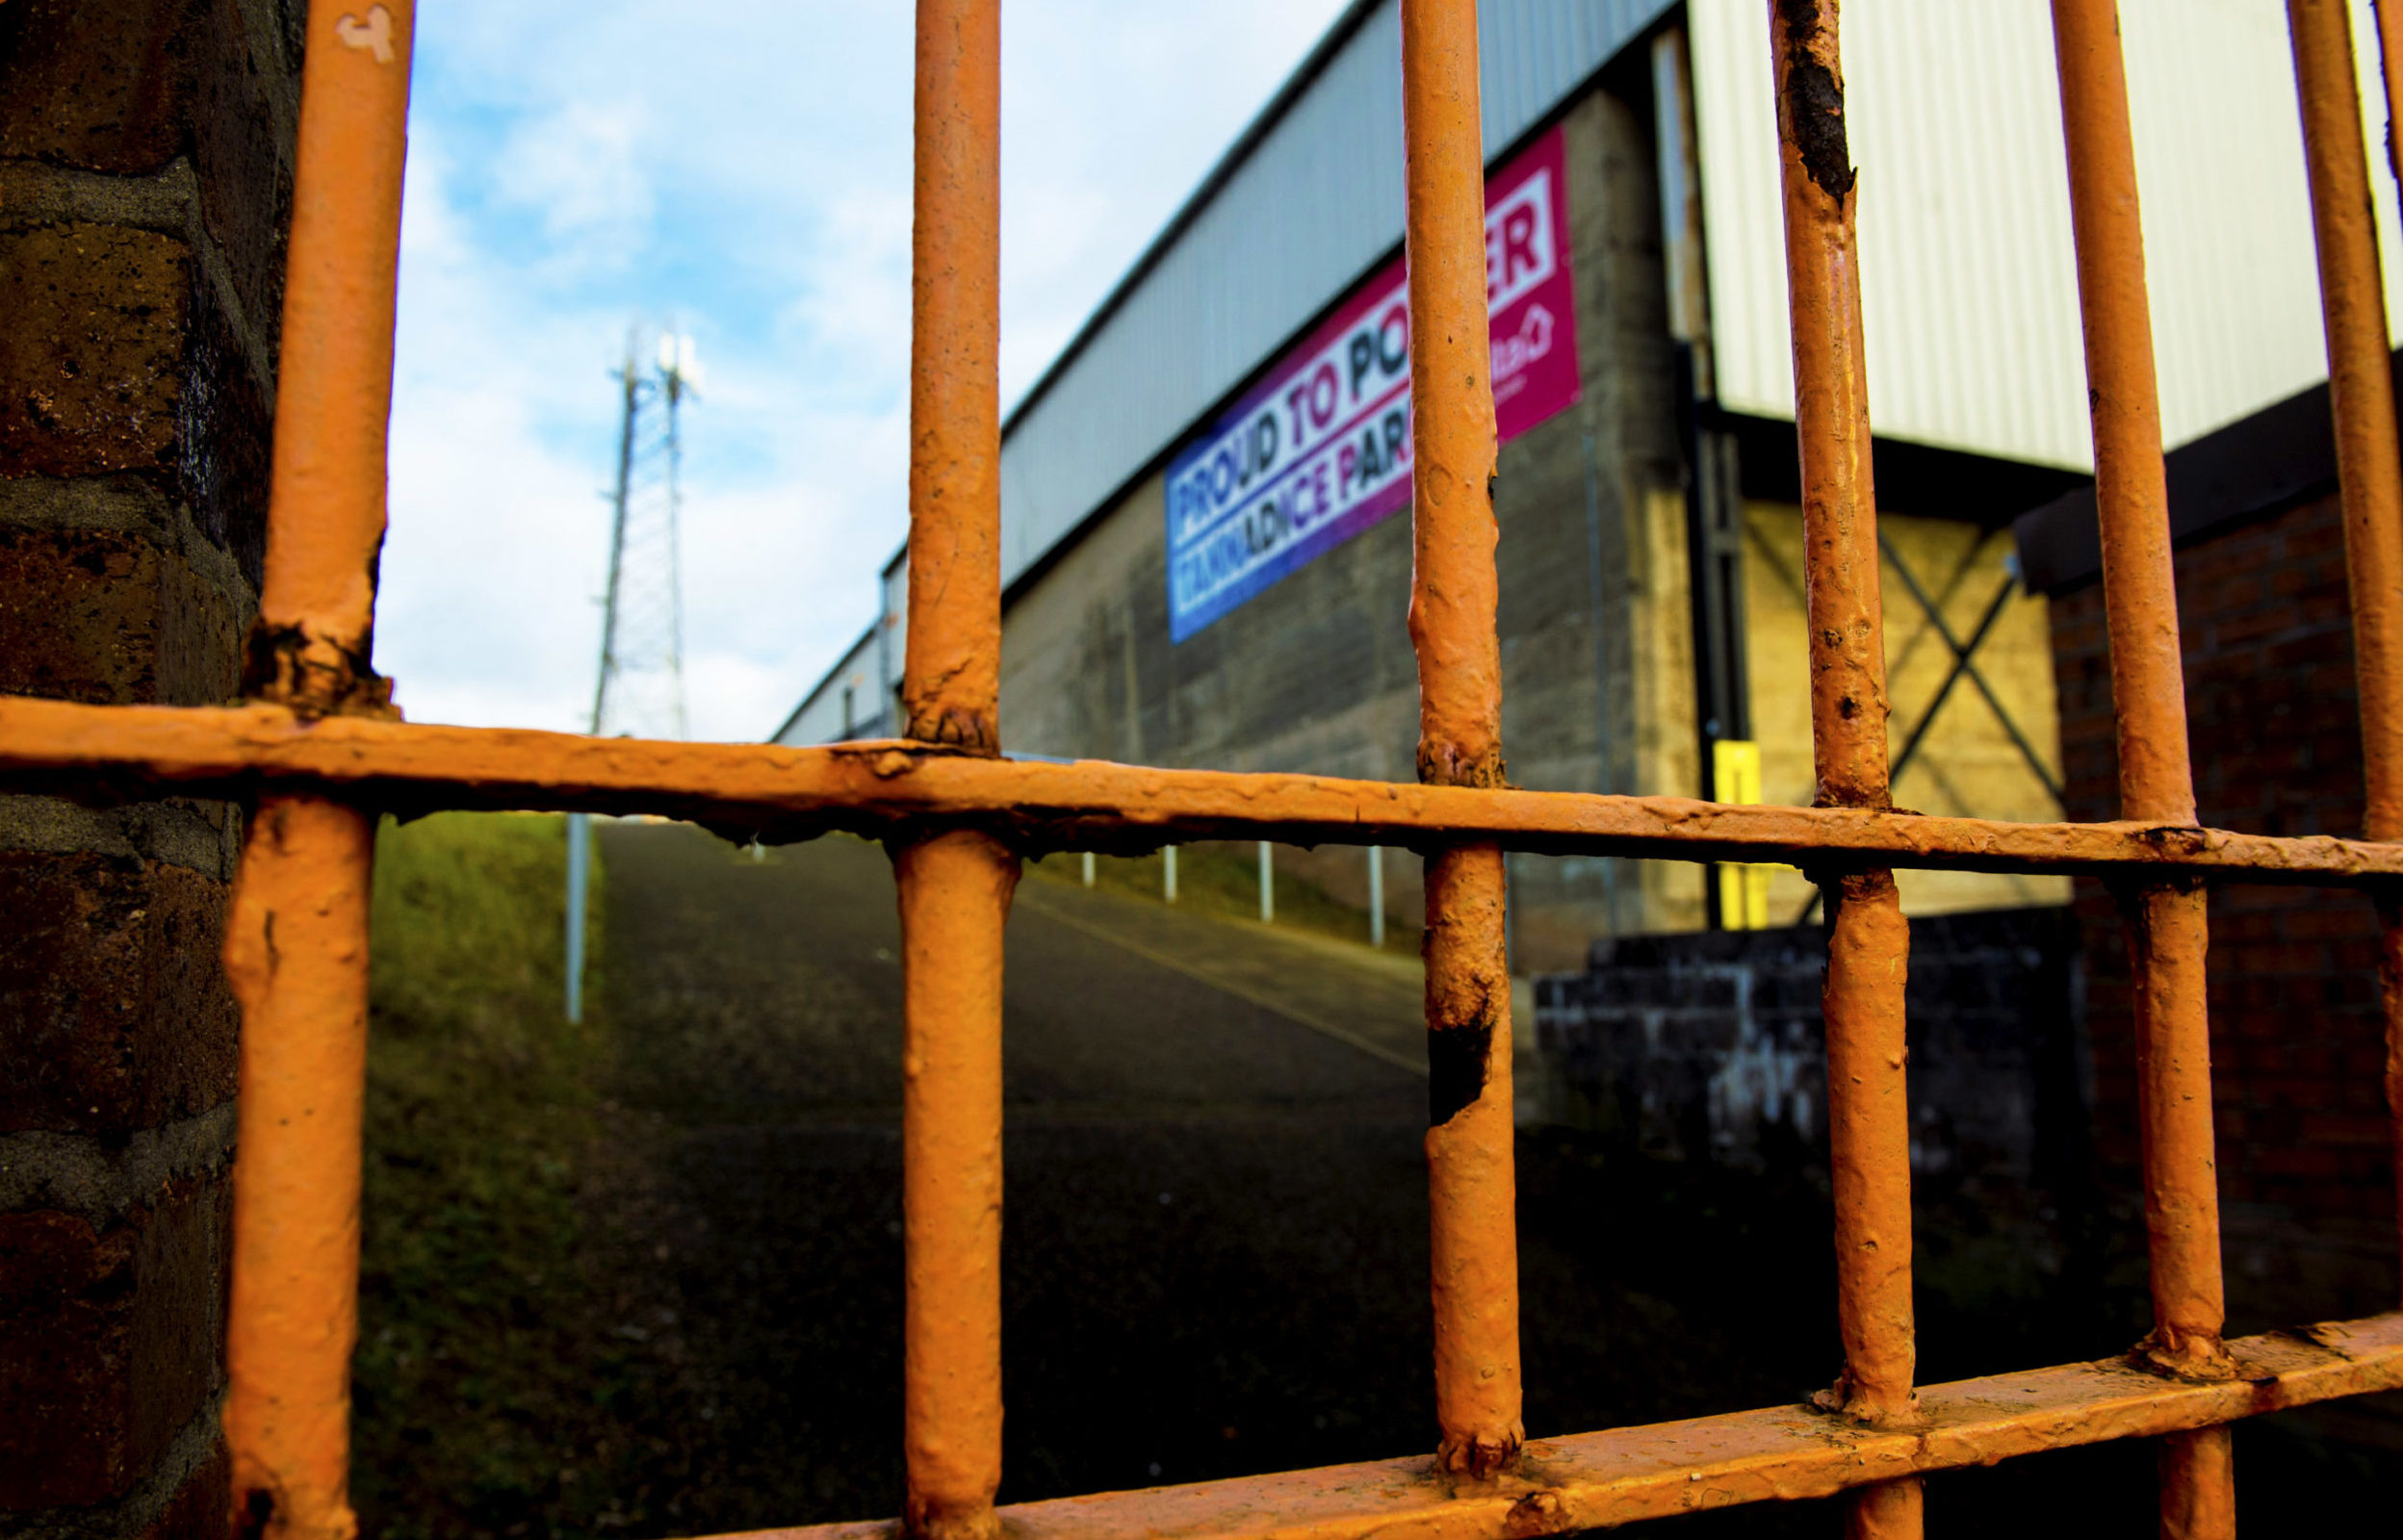 The gates are closed at Tannadice and across Scotland.